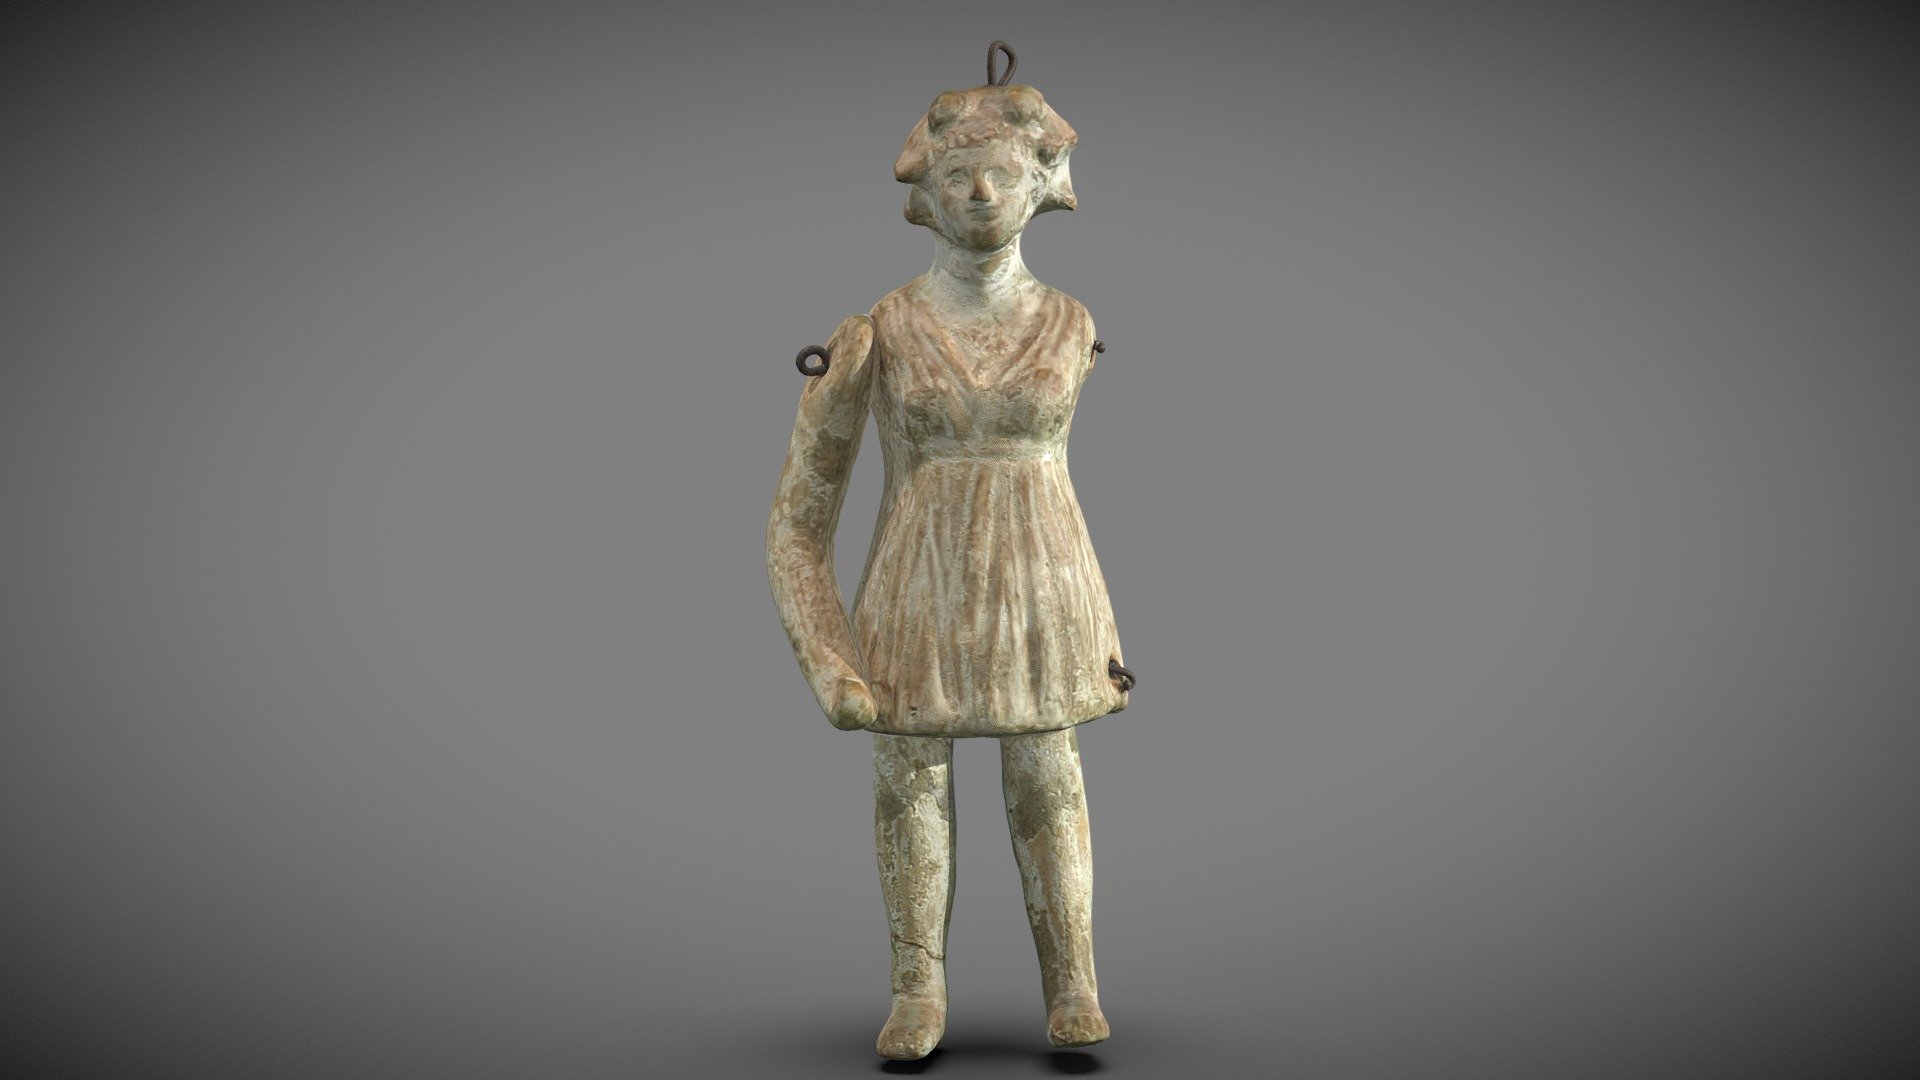 Doll wearing flower wreath

4th century BC

Taranto, Italy

Brussels,Royal Museum of Art and History

Inv. A.306.
Photogrammetry by Greektoys with the support of the Cinquantenaire Museum in Brussels.

Plagons were one of the favorite girls’ toys in ancient
Greece. It was a female figure doll usually made of
clay and with complicated hairstyles. In some cases
the clothing of the doll was painted on it, while in other
cases, girls were sewing clothes for their dolls out of
rags. Plagons had an educational character too, by
introducing girls to the role and obligations of a woman
in society. On the eve of every girl’s wedding day,
plagons were dedicated to the goddess Artemis.

A decisive step in differentiating religious figurines to dolls was the
appearance of a jointed doll (nevrospaston) with
movable arms and legs, while the use of mold by
modelers would boost mass production so as every girl
could own her favorite heroine! - Ancient greek doll "plagon" - 3D model by Greektoys.org (@magikos-fakos) 3d model